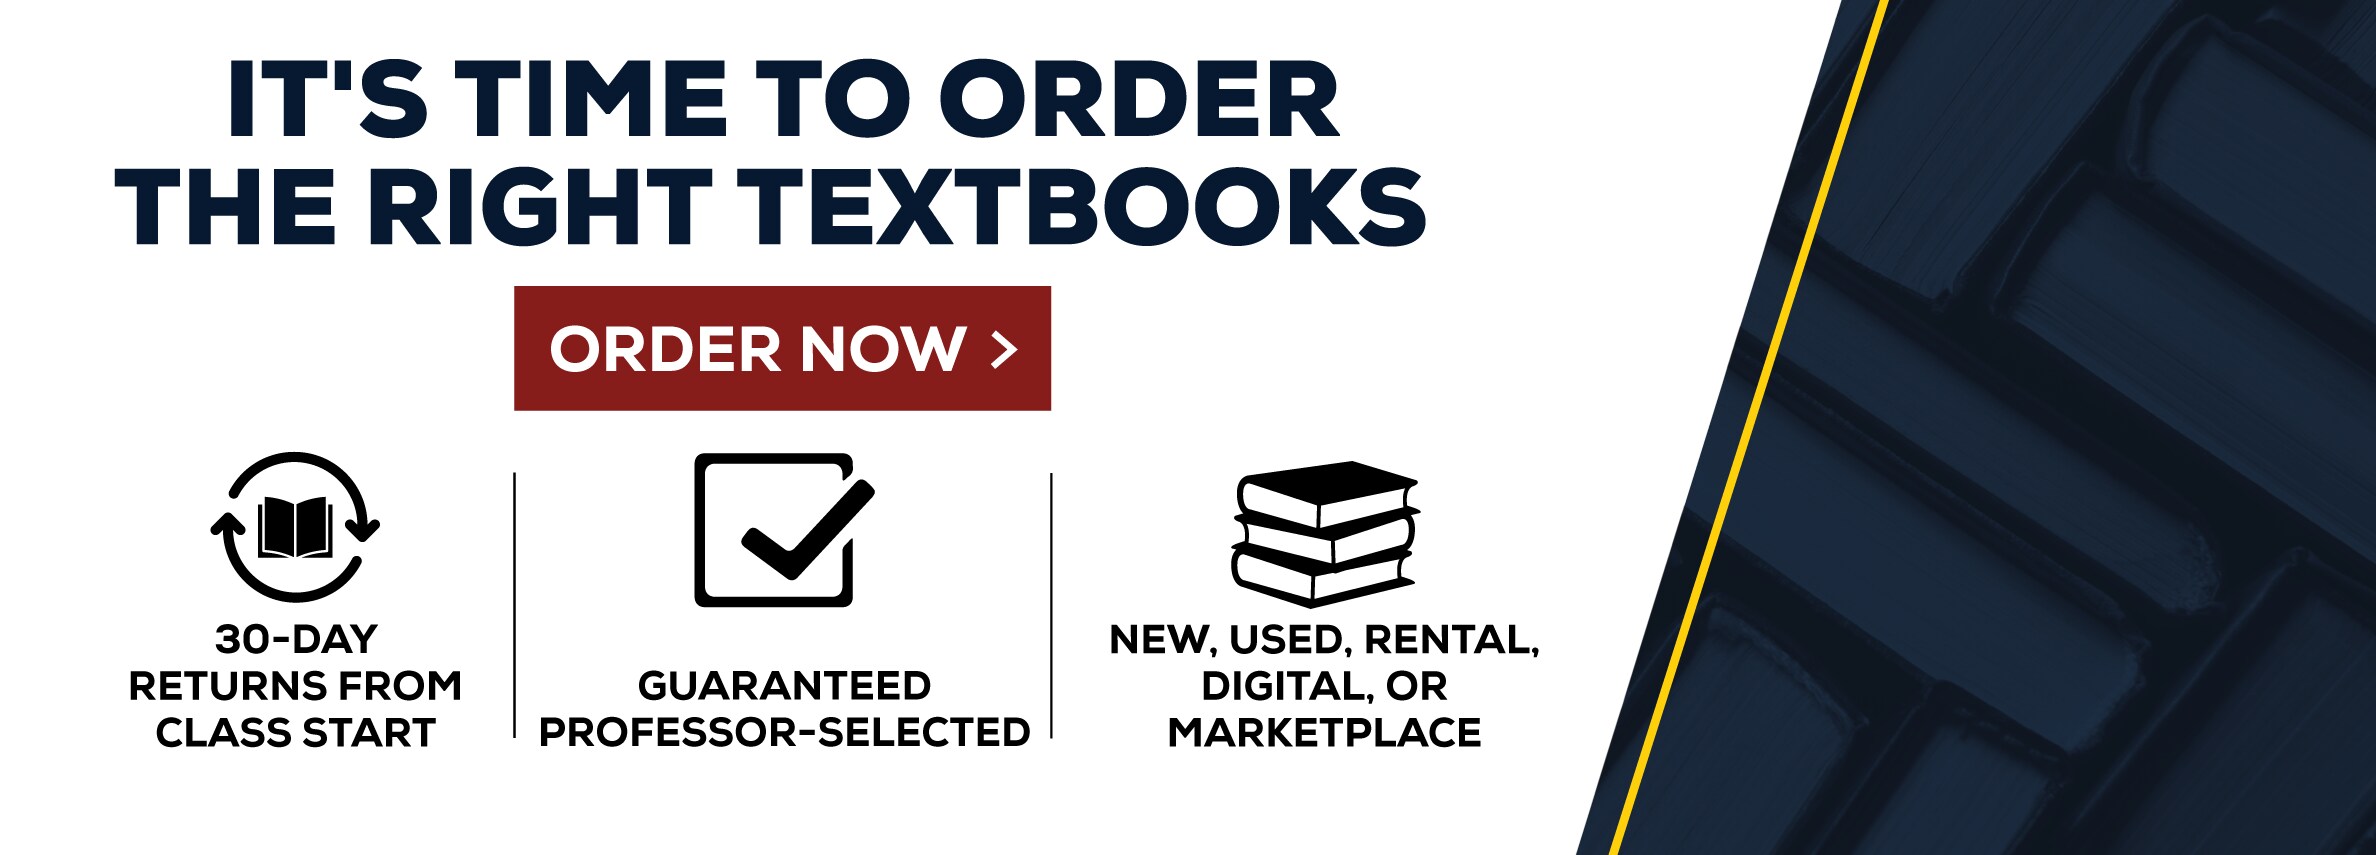 It's time to order the right textbooks. Order now. 30-day returns from class start. Guaranteed professor-selected. New, Used, rental, digital, or marketplace.